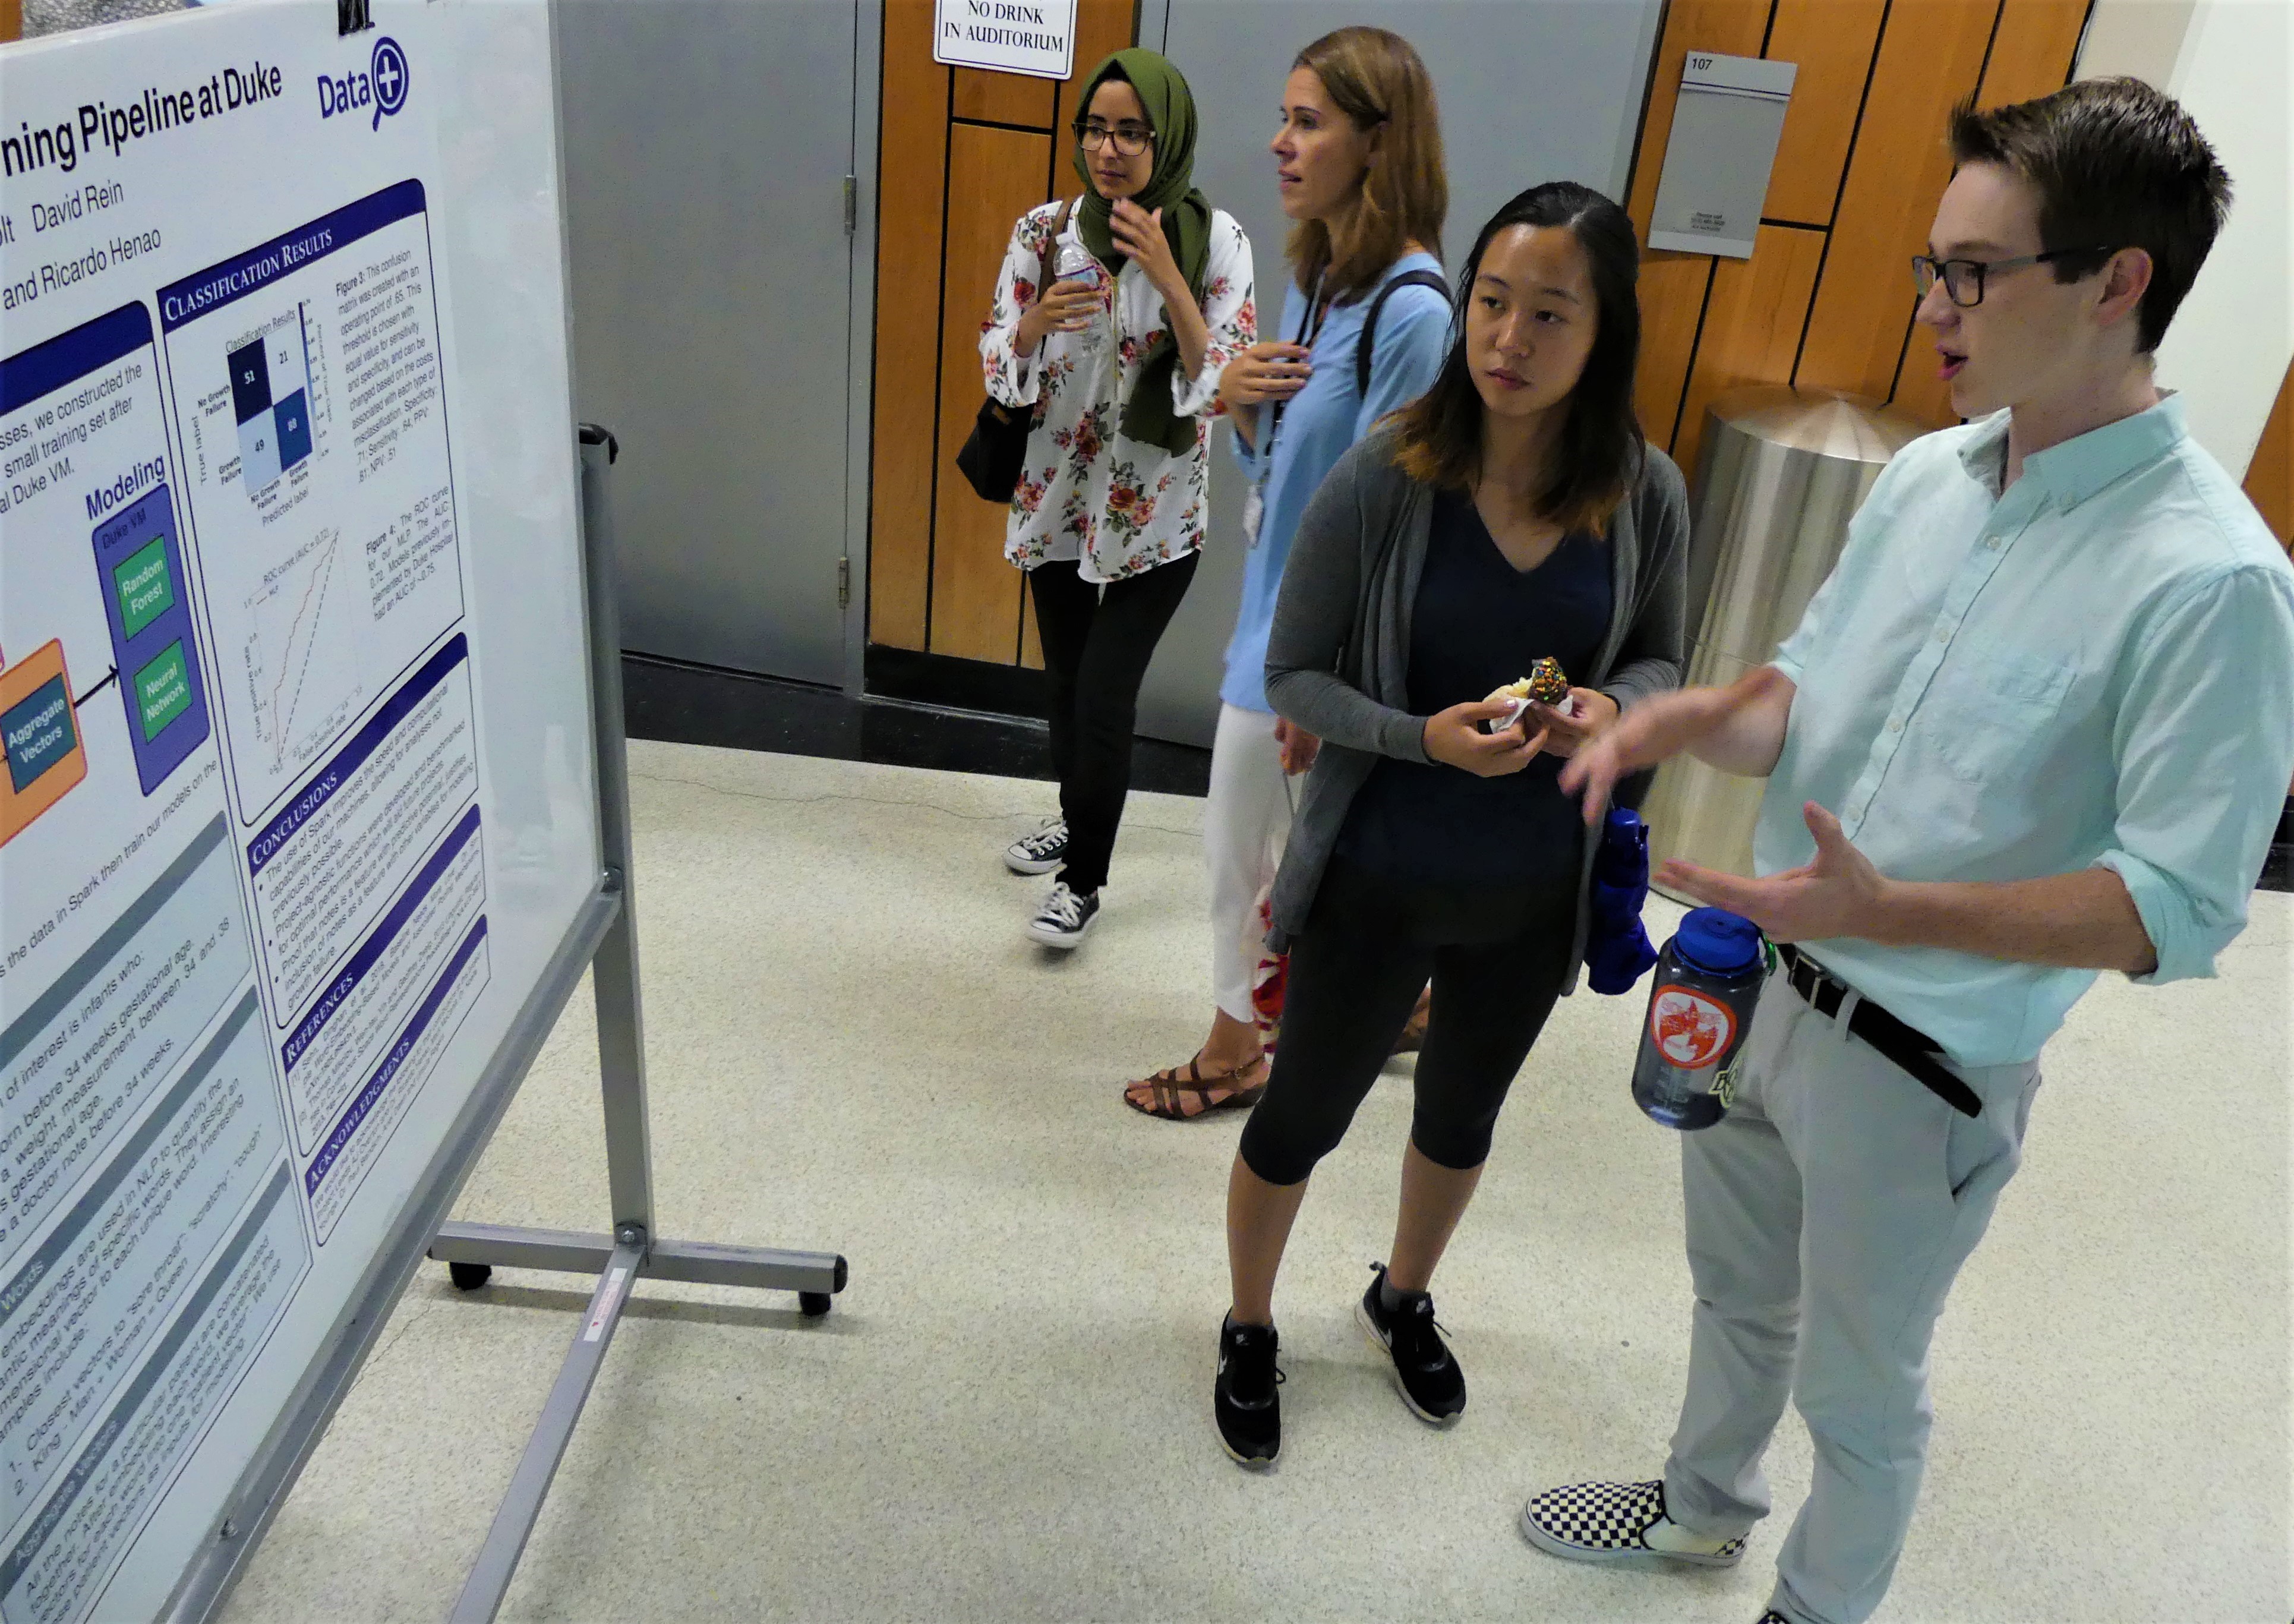 Data+ teams present posters detailing their work following their summer of research.